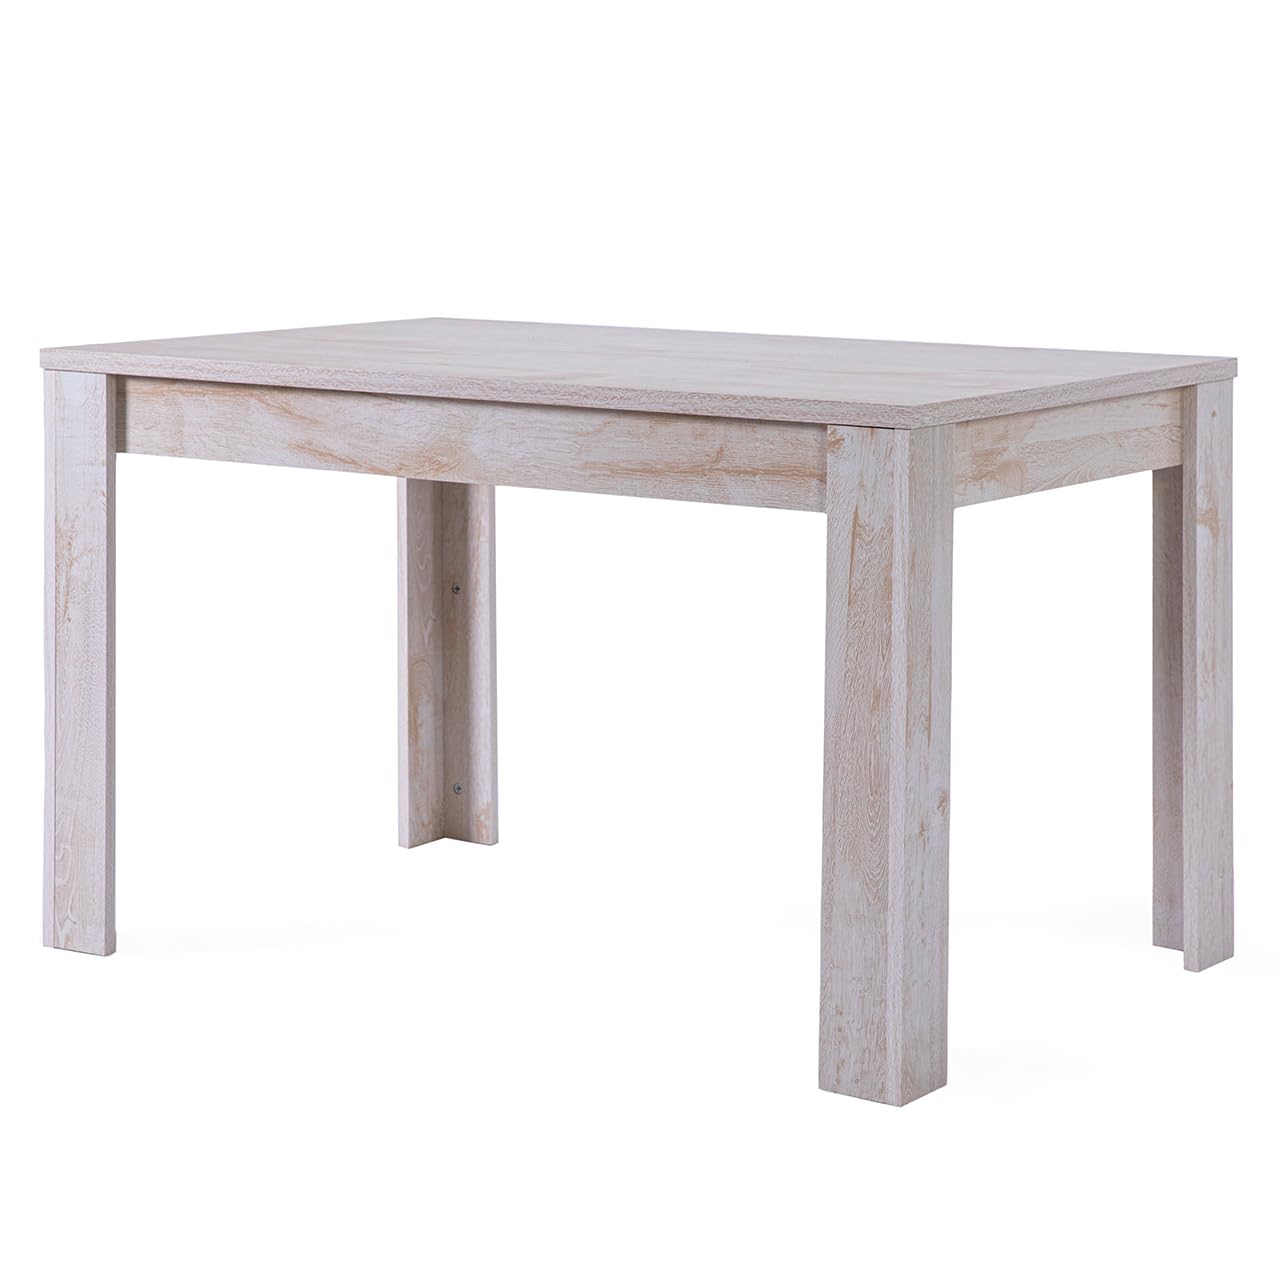 PAN Home Athenas 4 Seater Dining Table - Maple